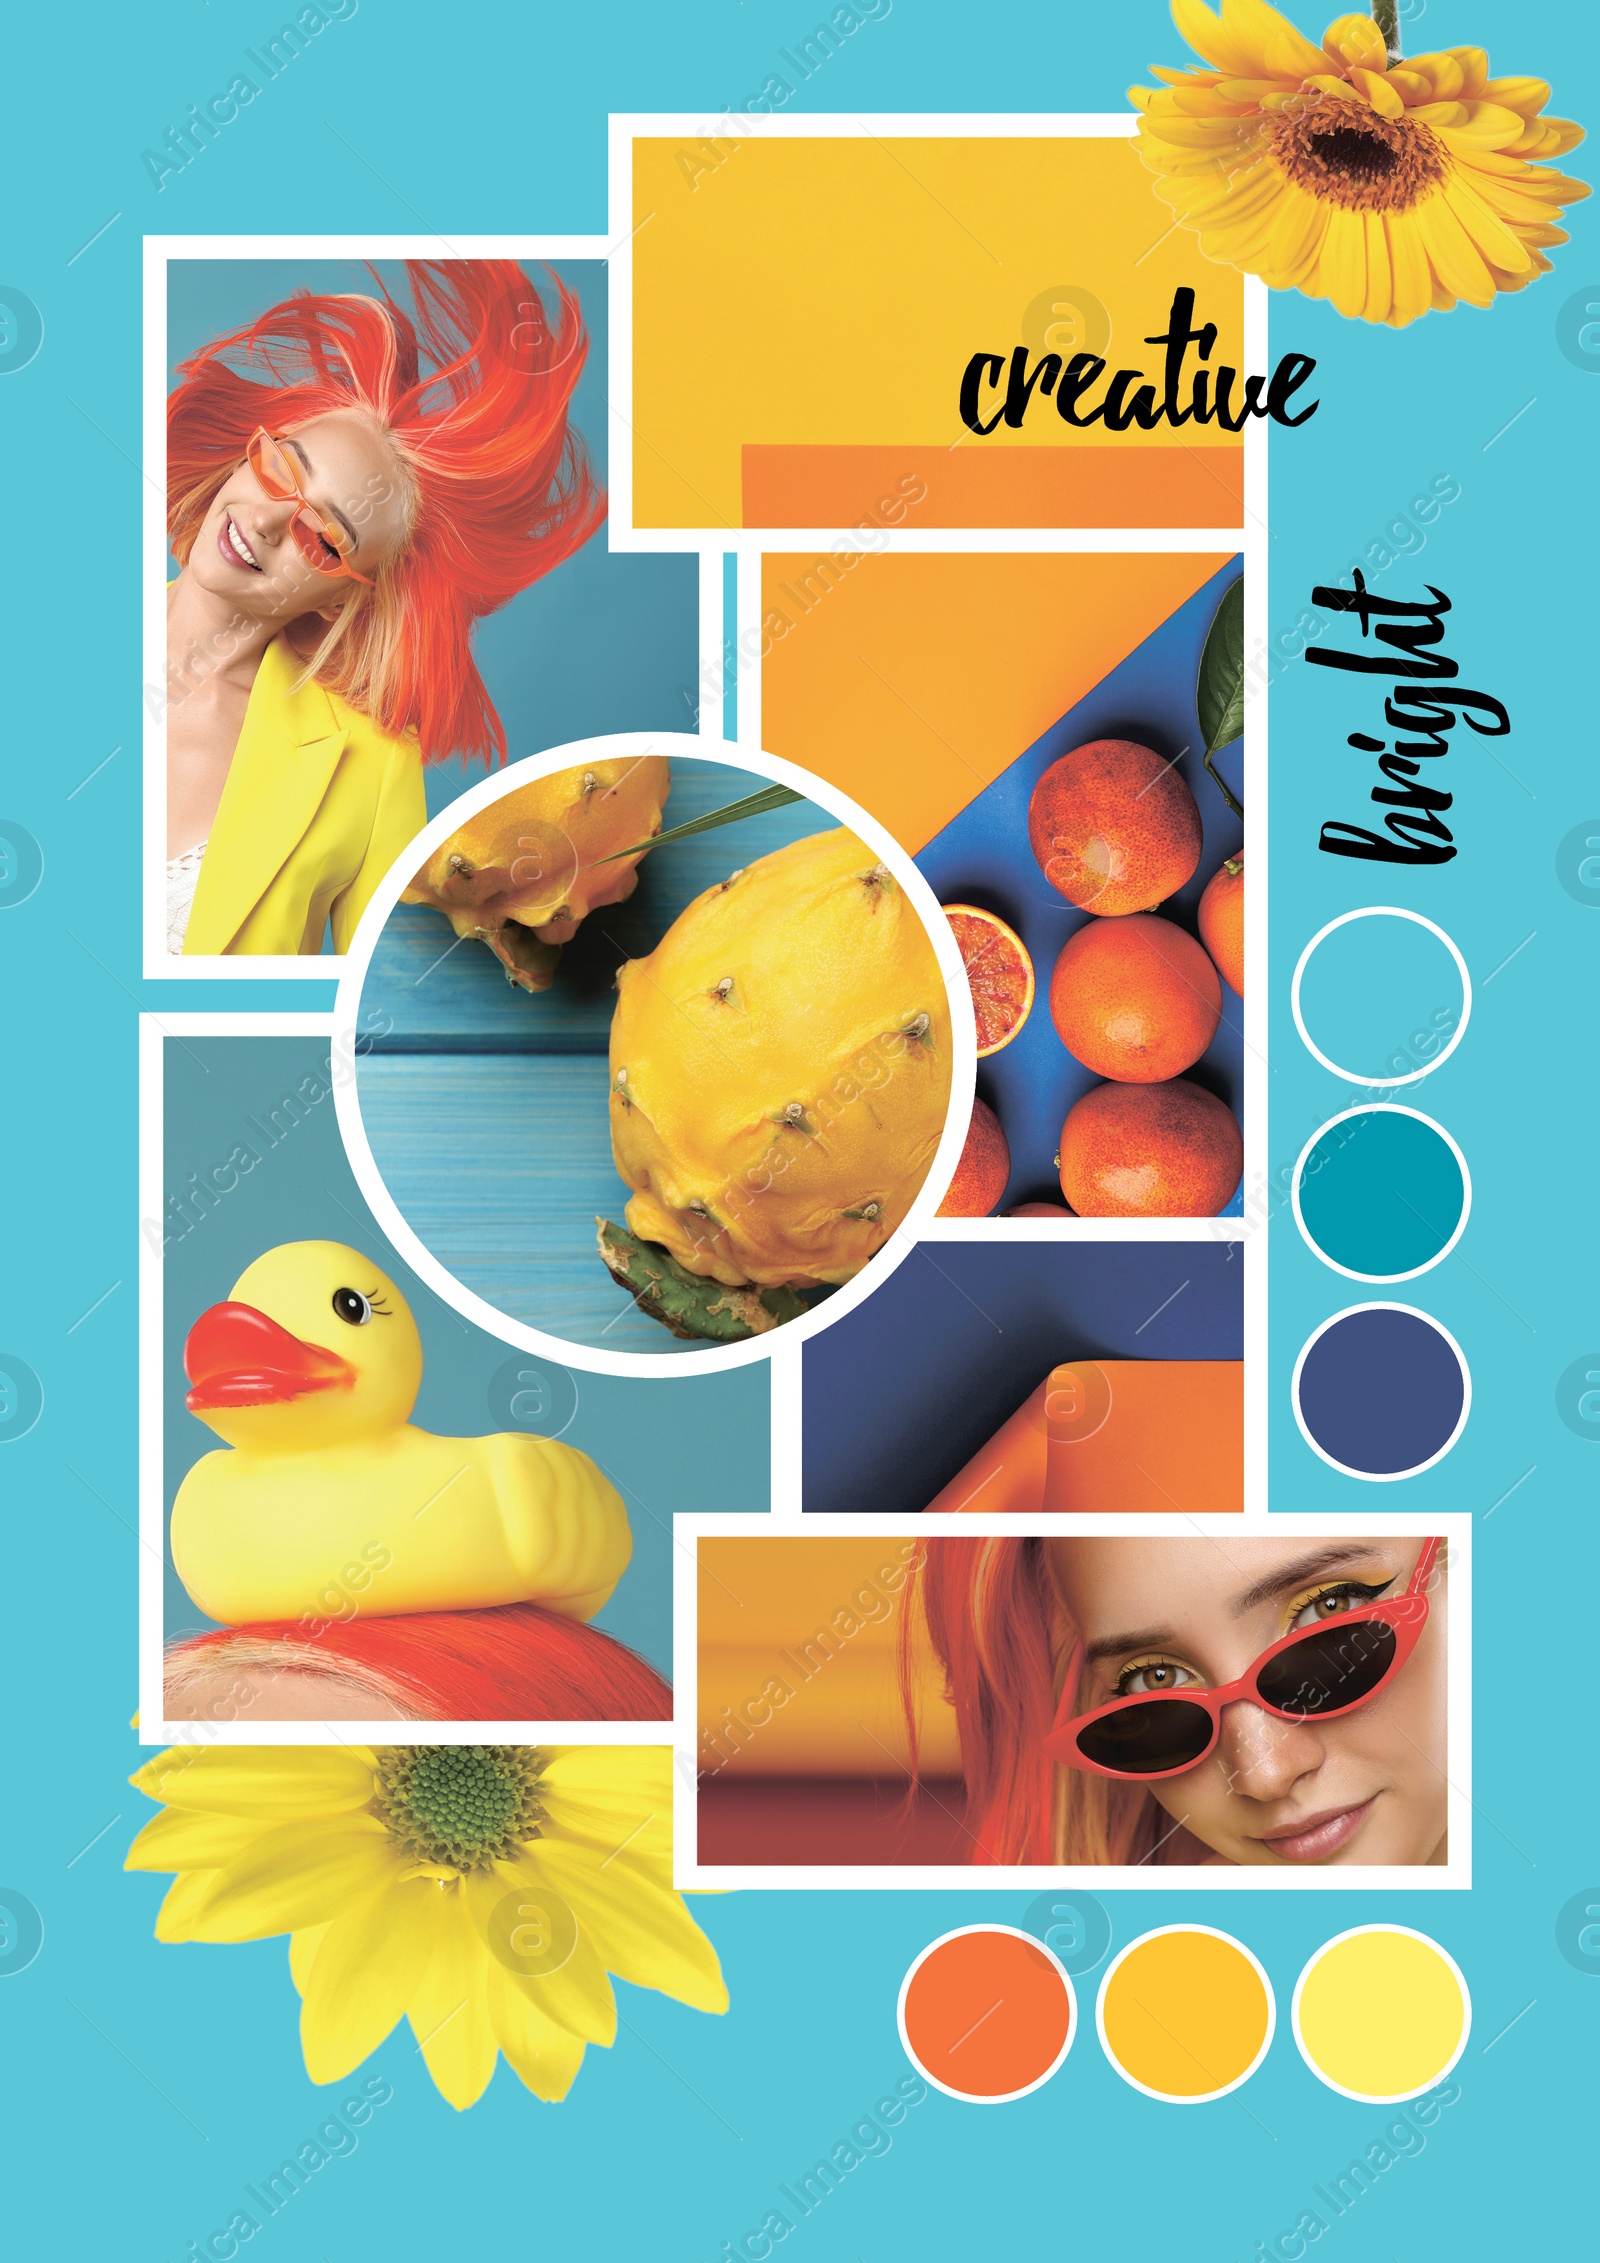 Image of Inspiring mood board. Collage with beautiful and aesthetic photos